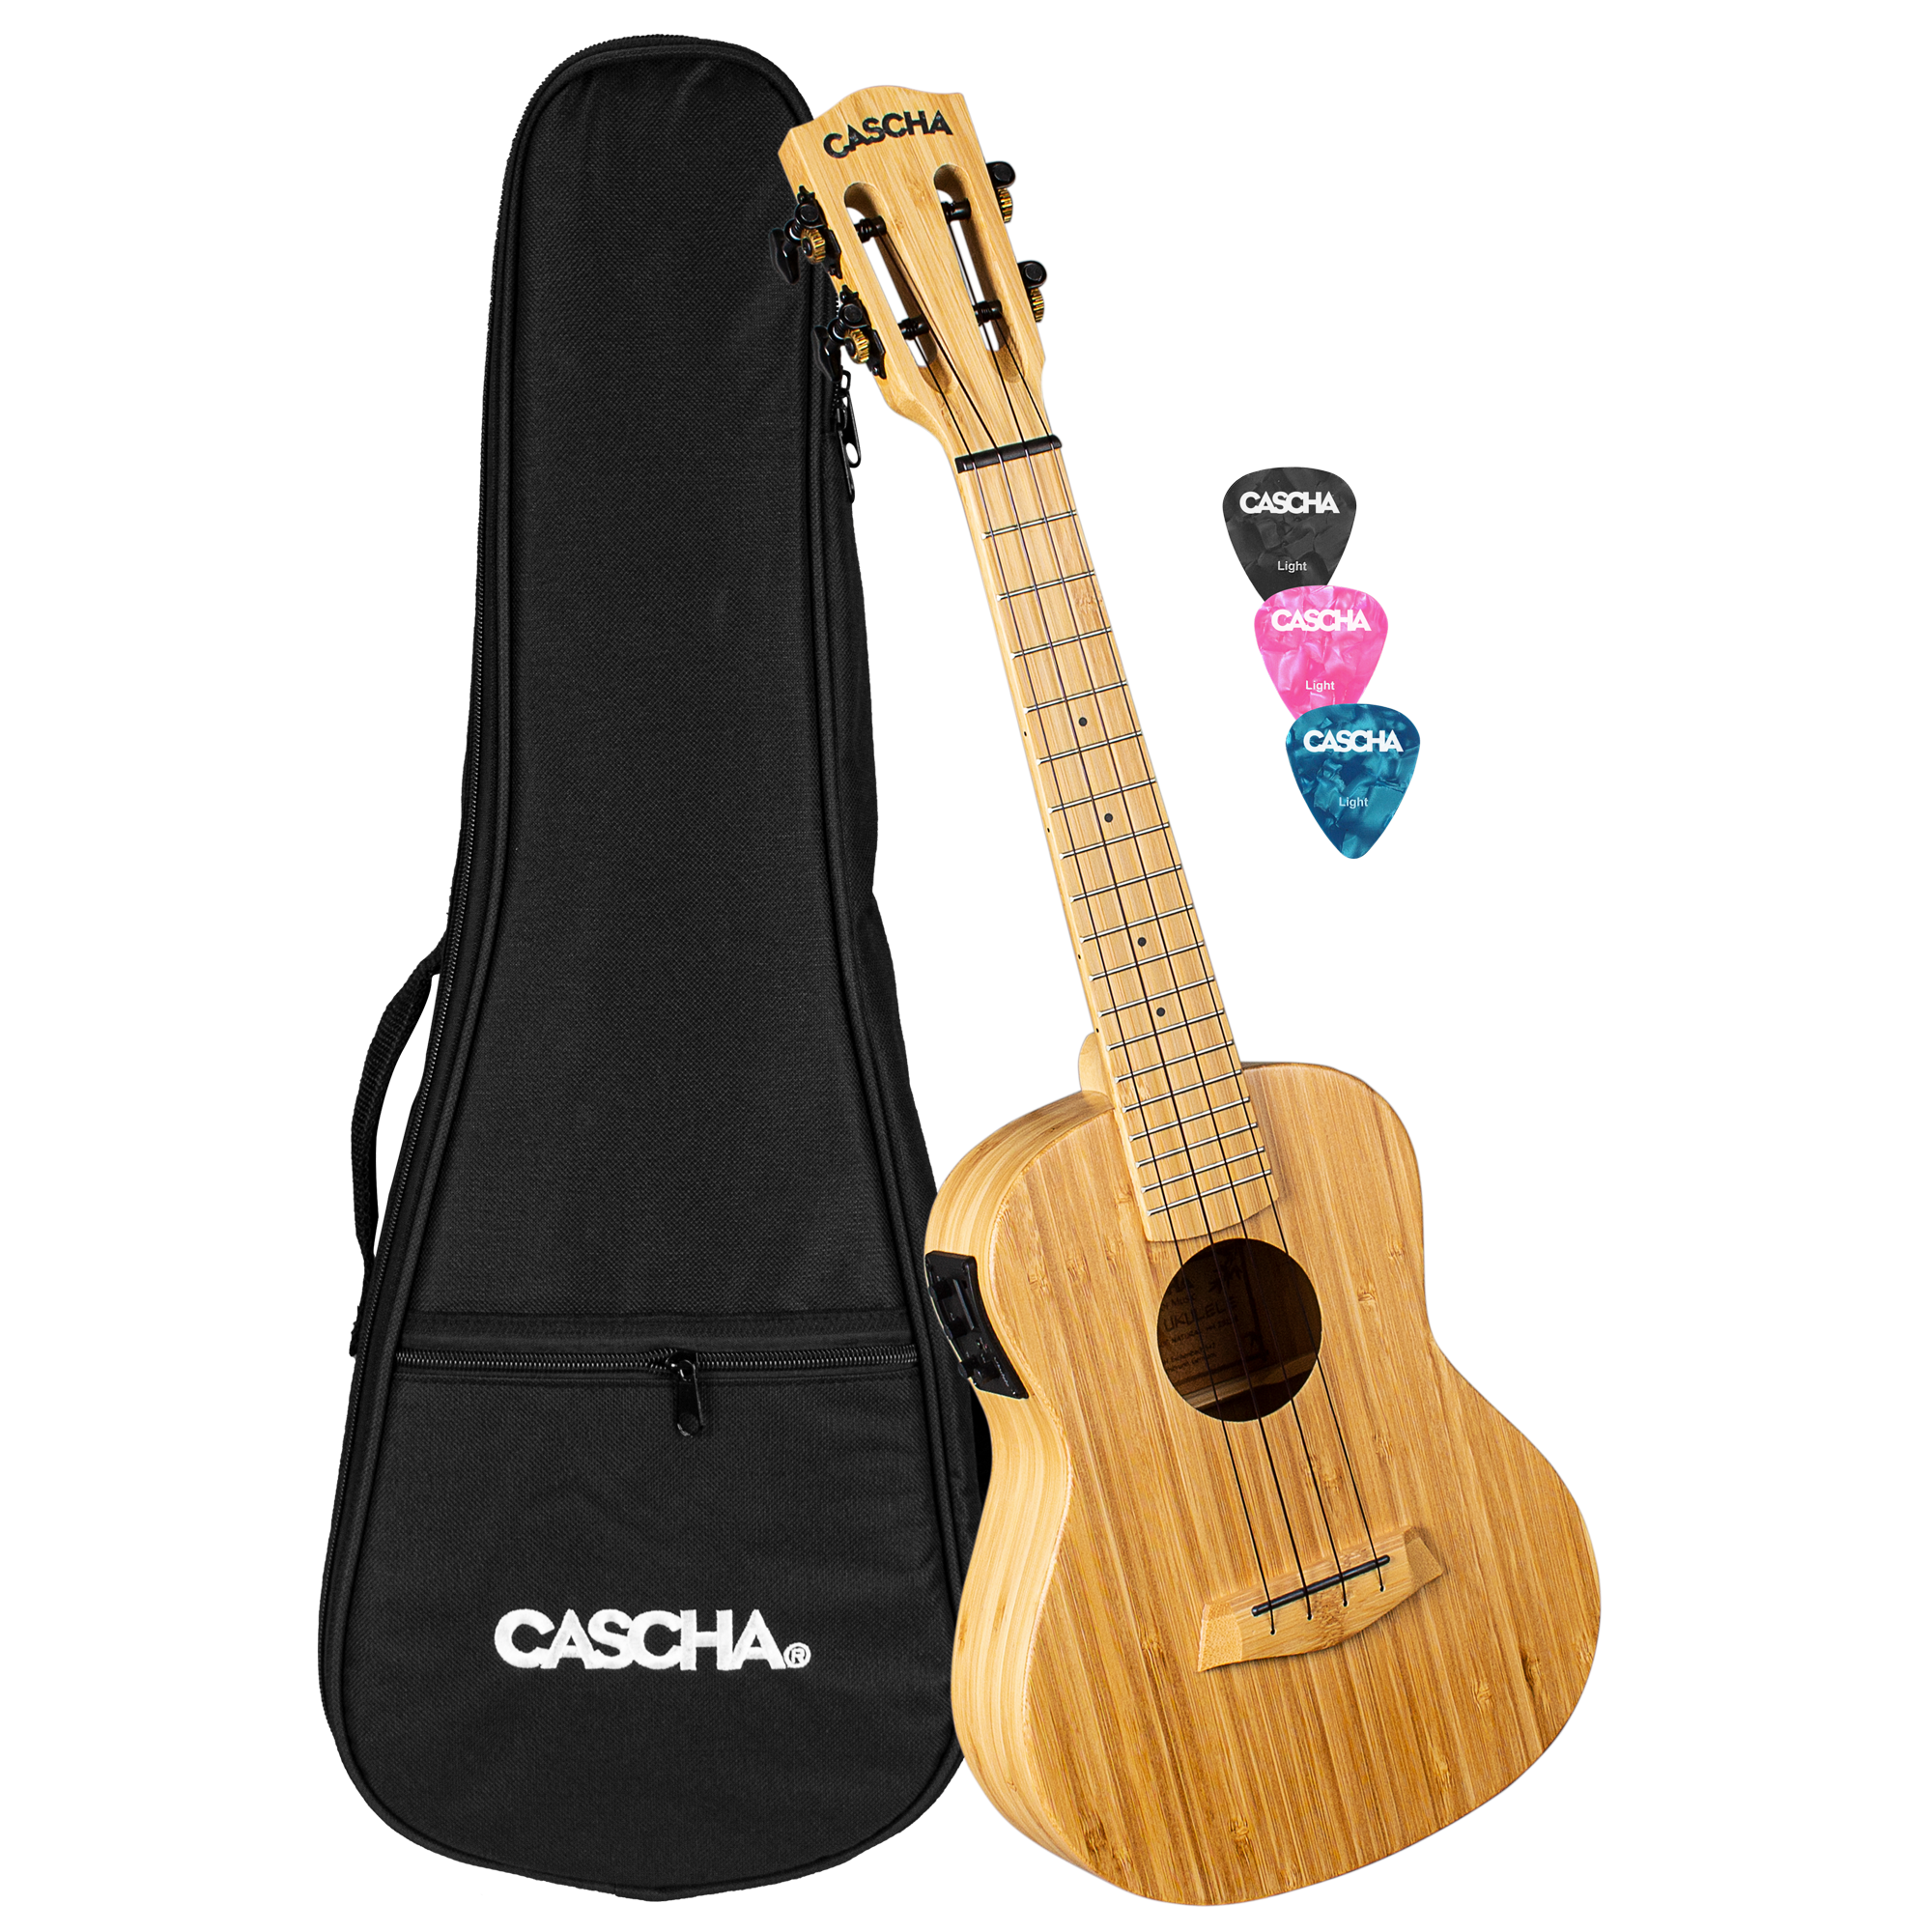 Concert Ukulele Bamboo Natural with pickup system